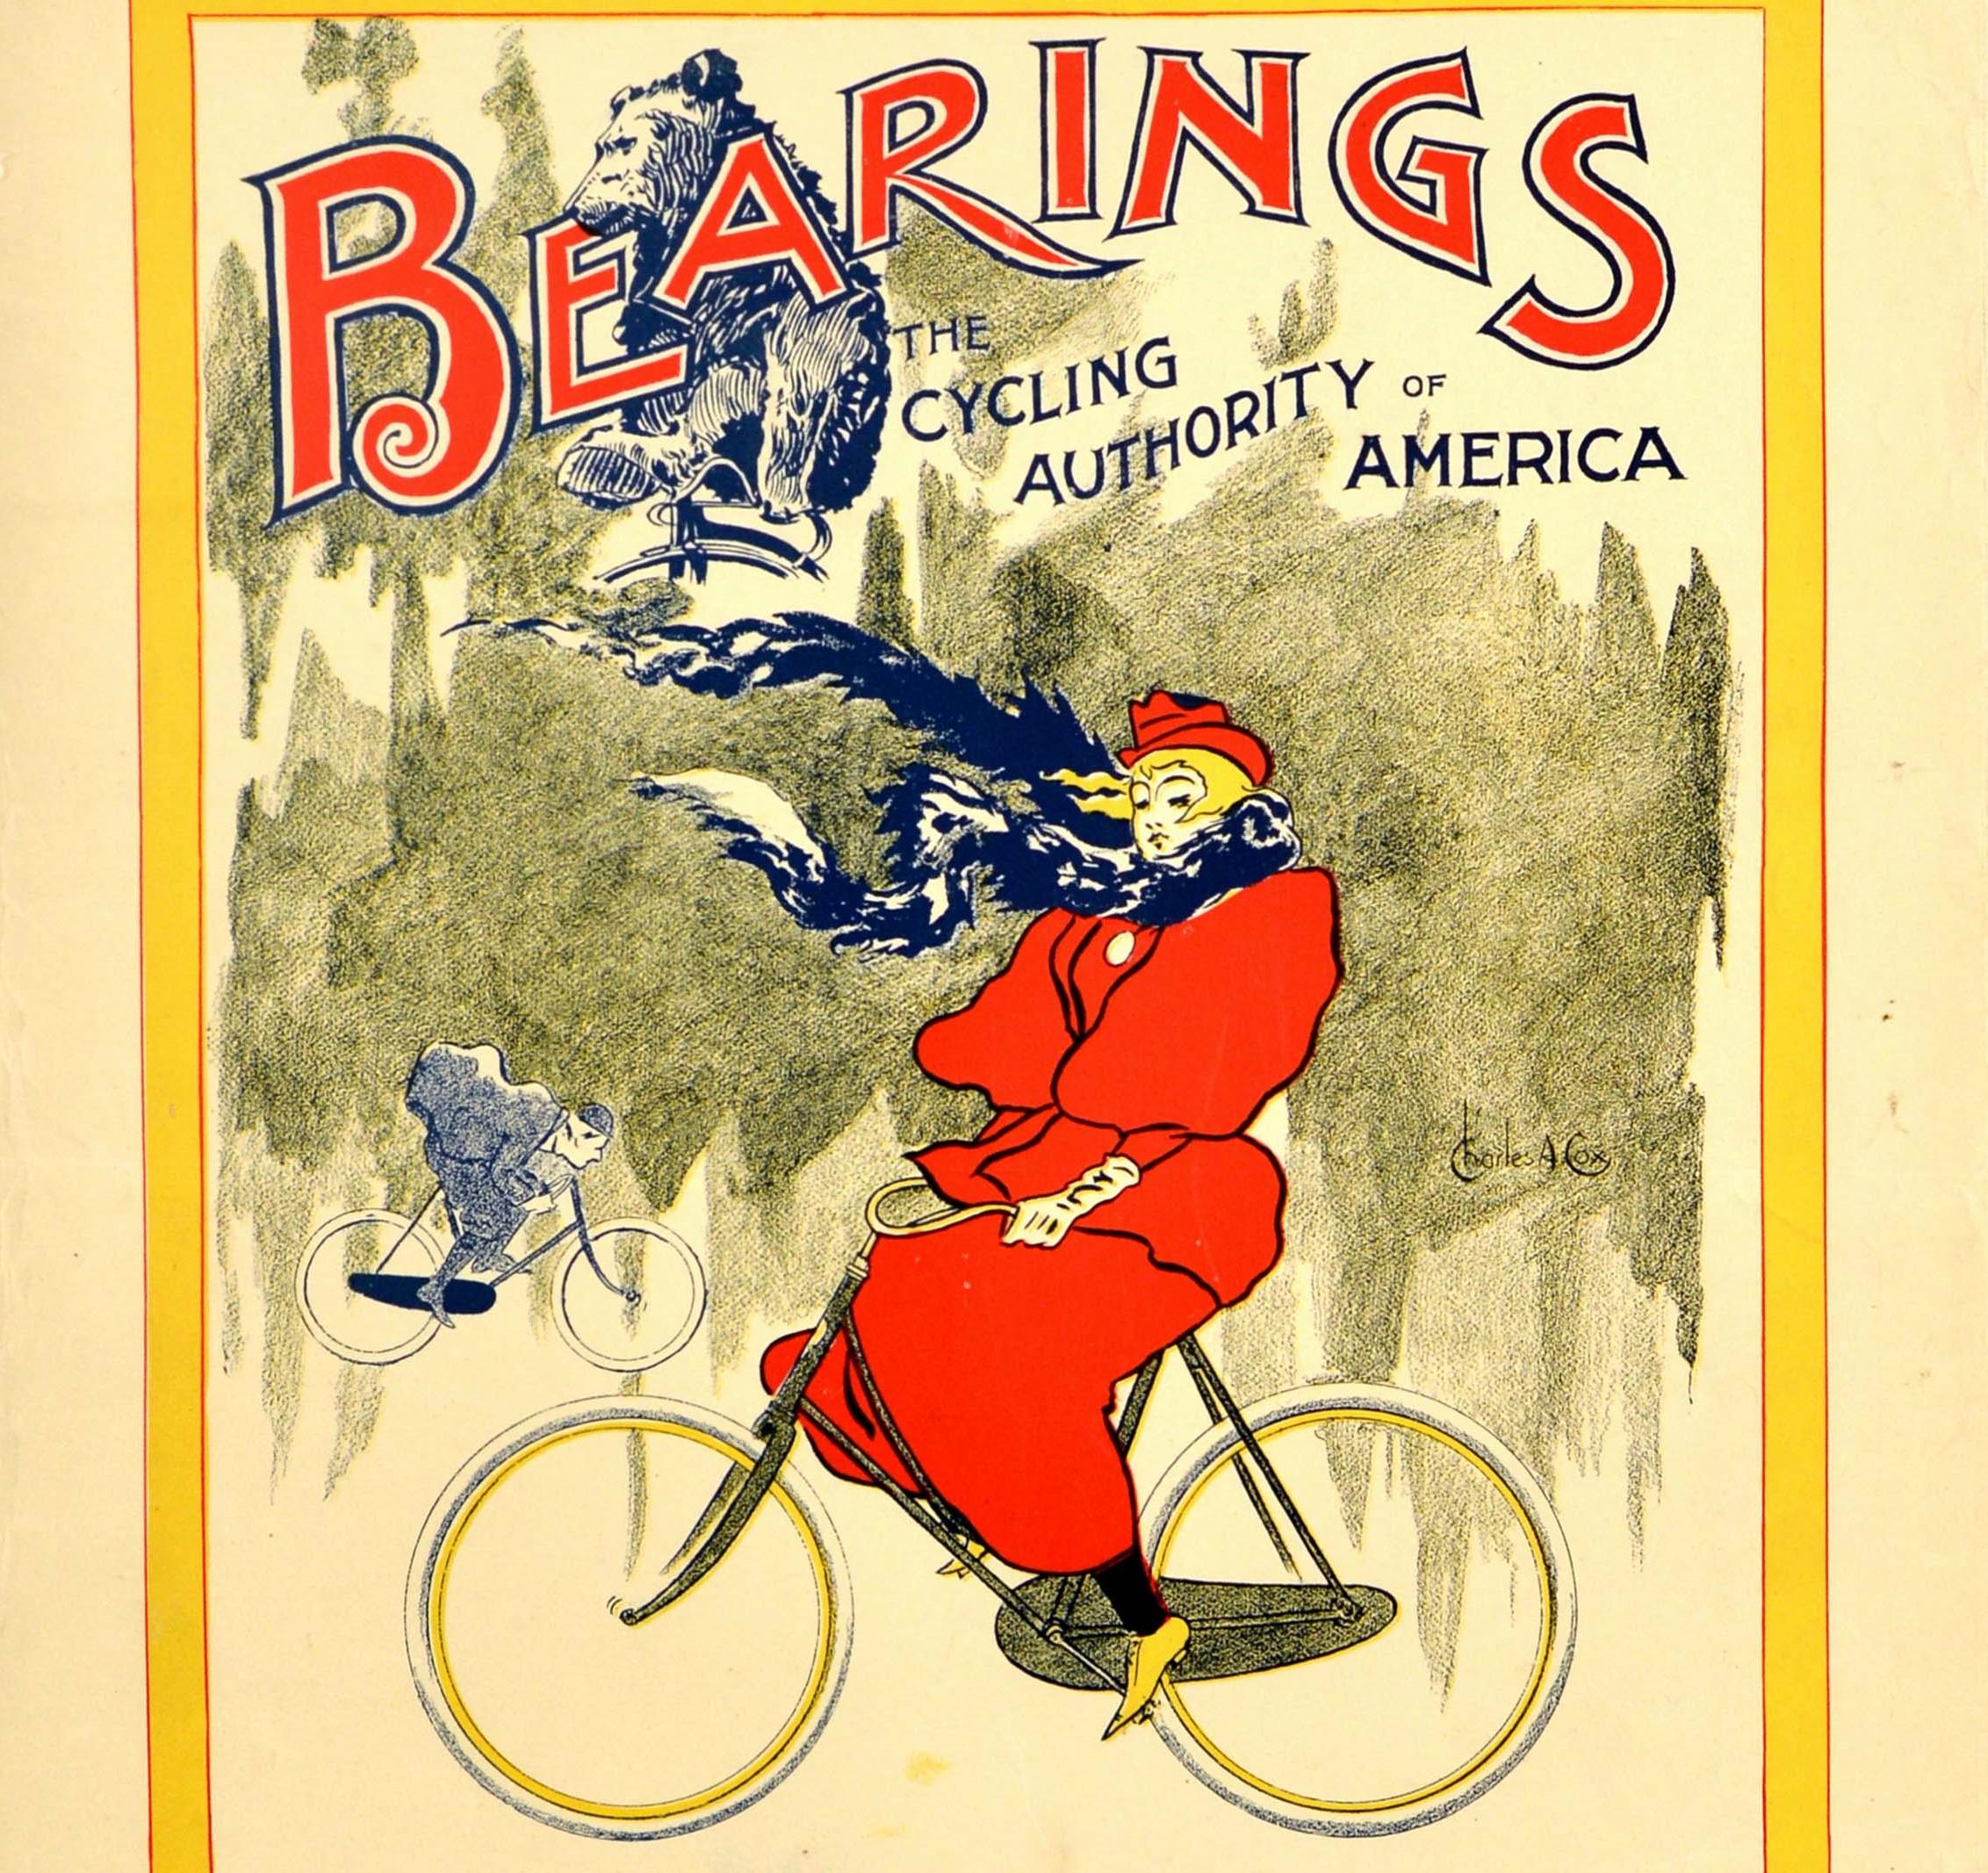 American Original Antique Poster Bearings The Cycling Authority Of America Magazine Art For Sale